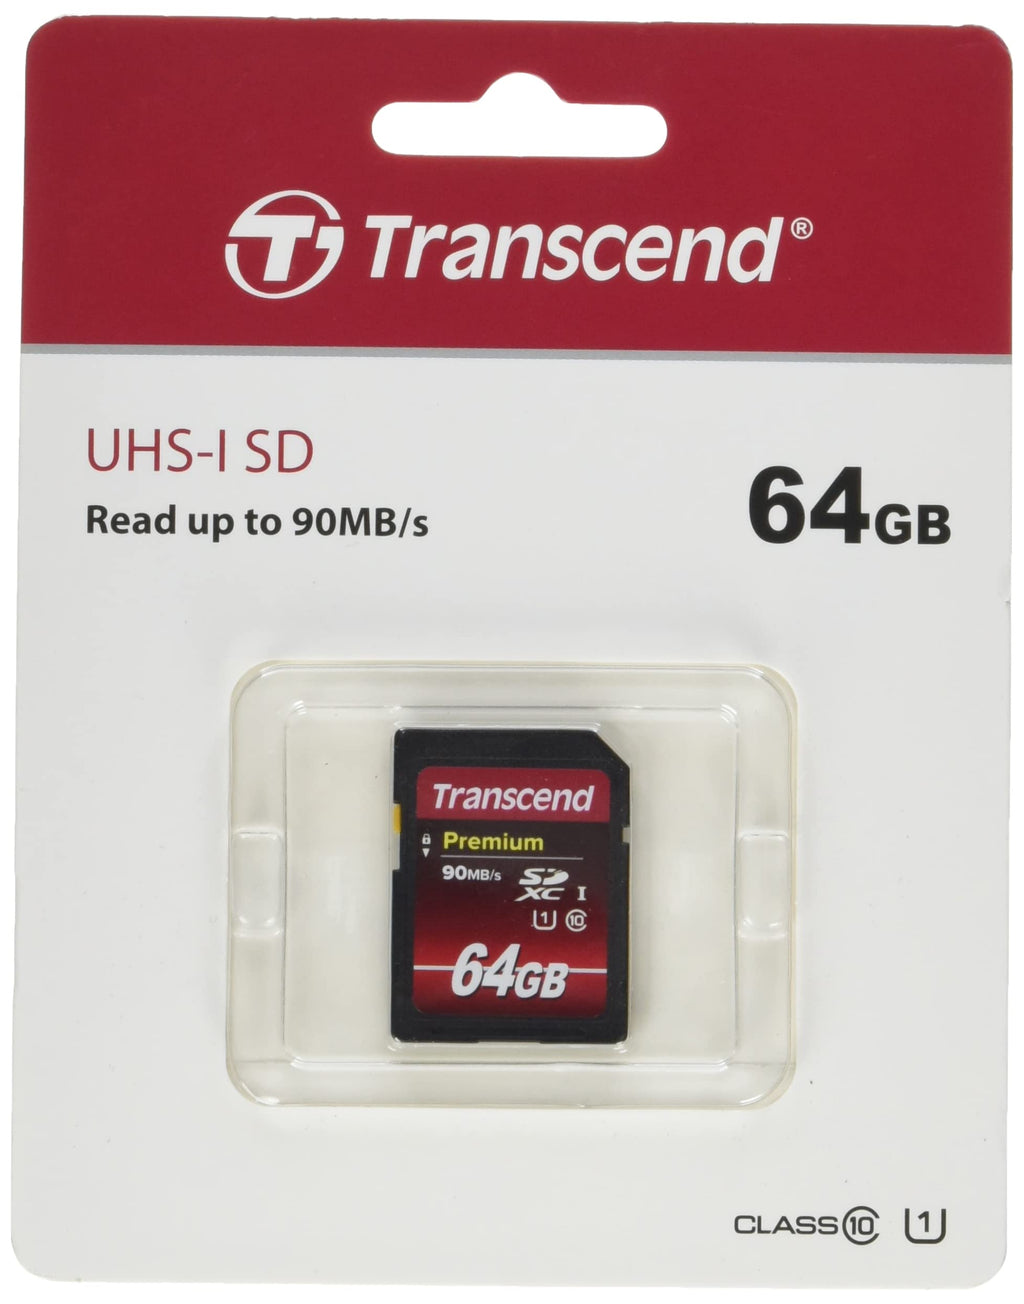 Transcend 64GB SDXC Class 10 Uhs-1 Flash Memory Card Up to 60MB/S (TS64GSDU1) Standard Packaging